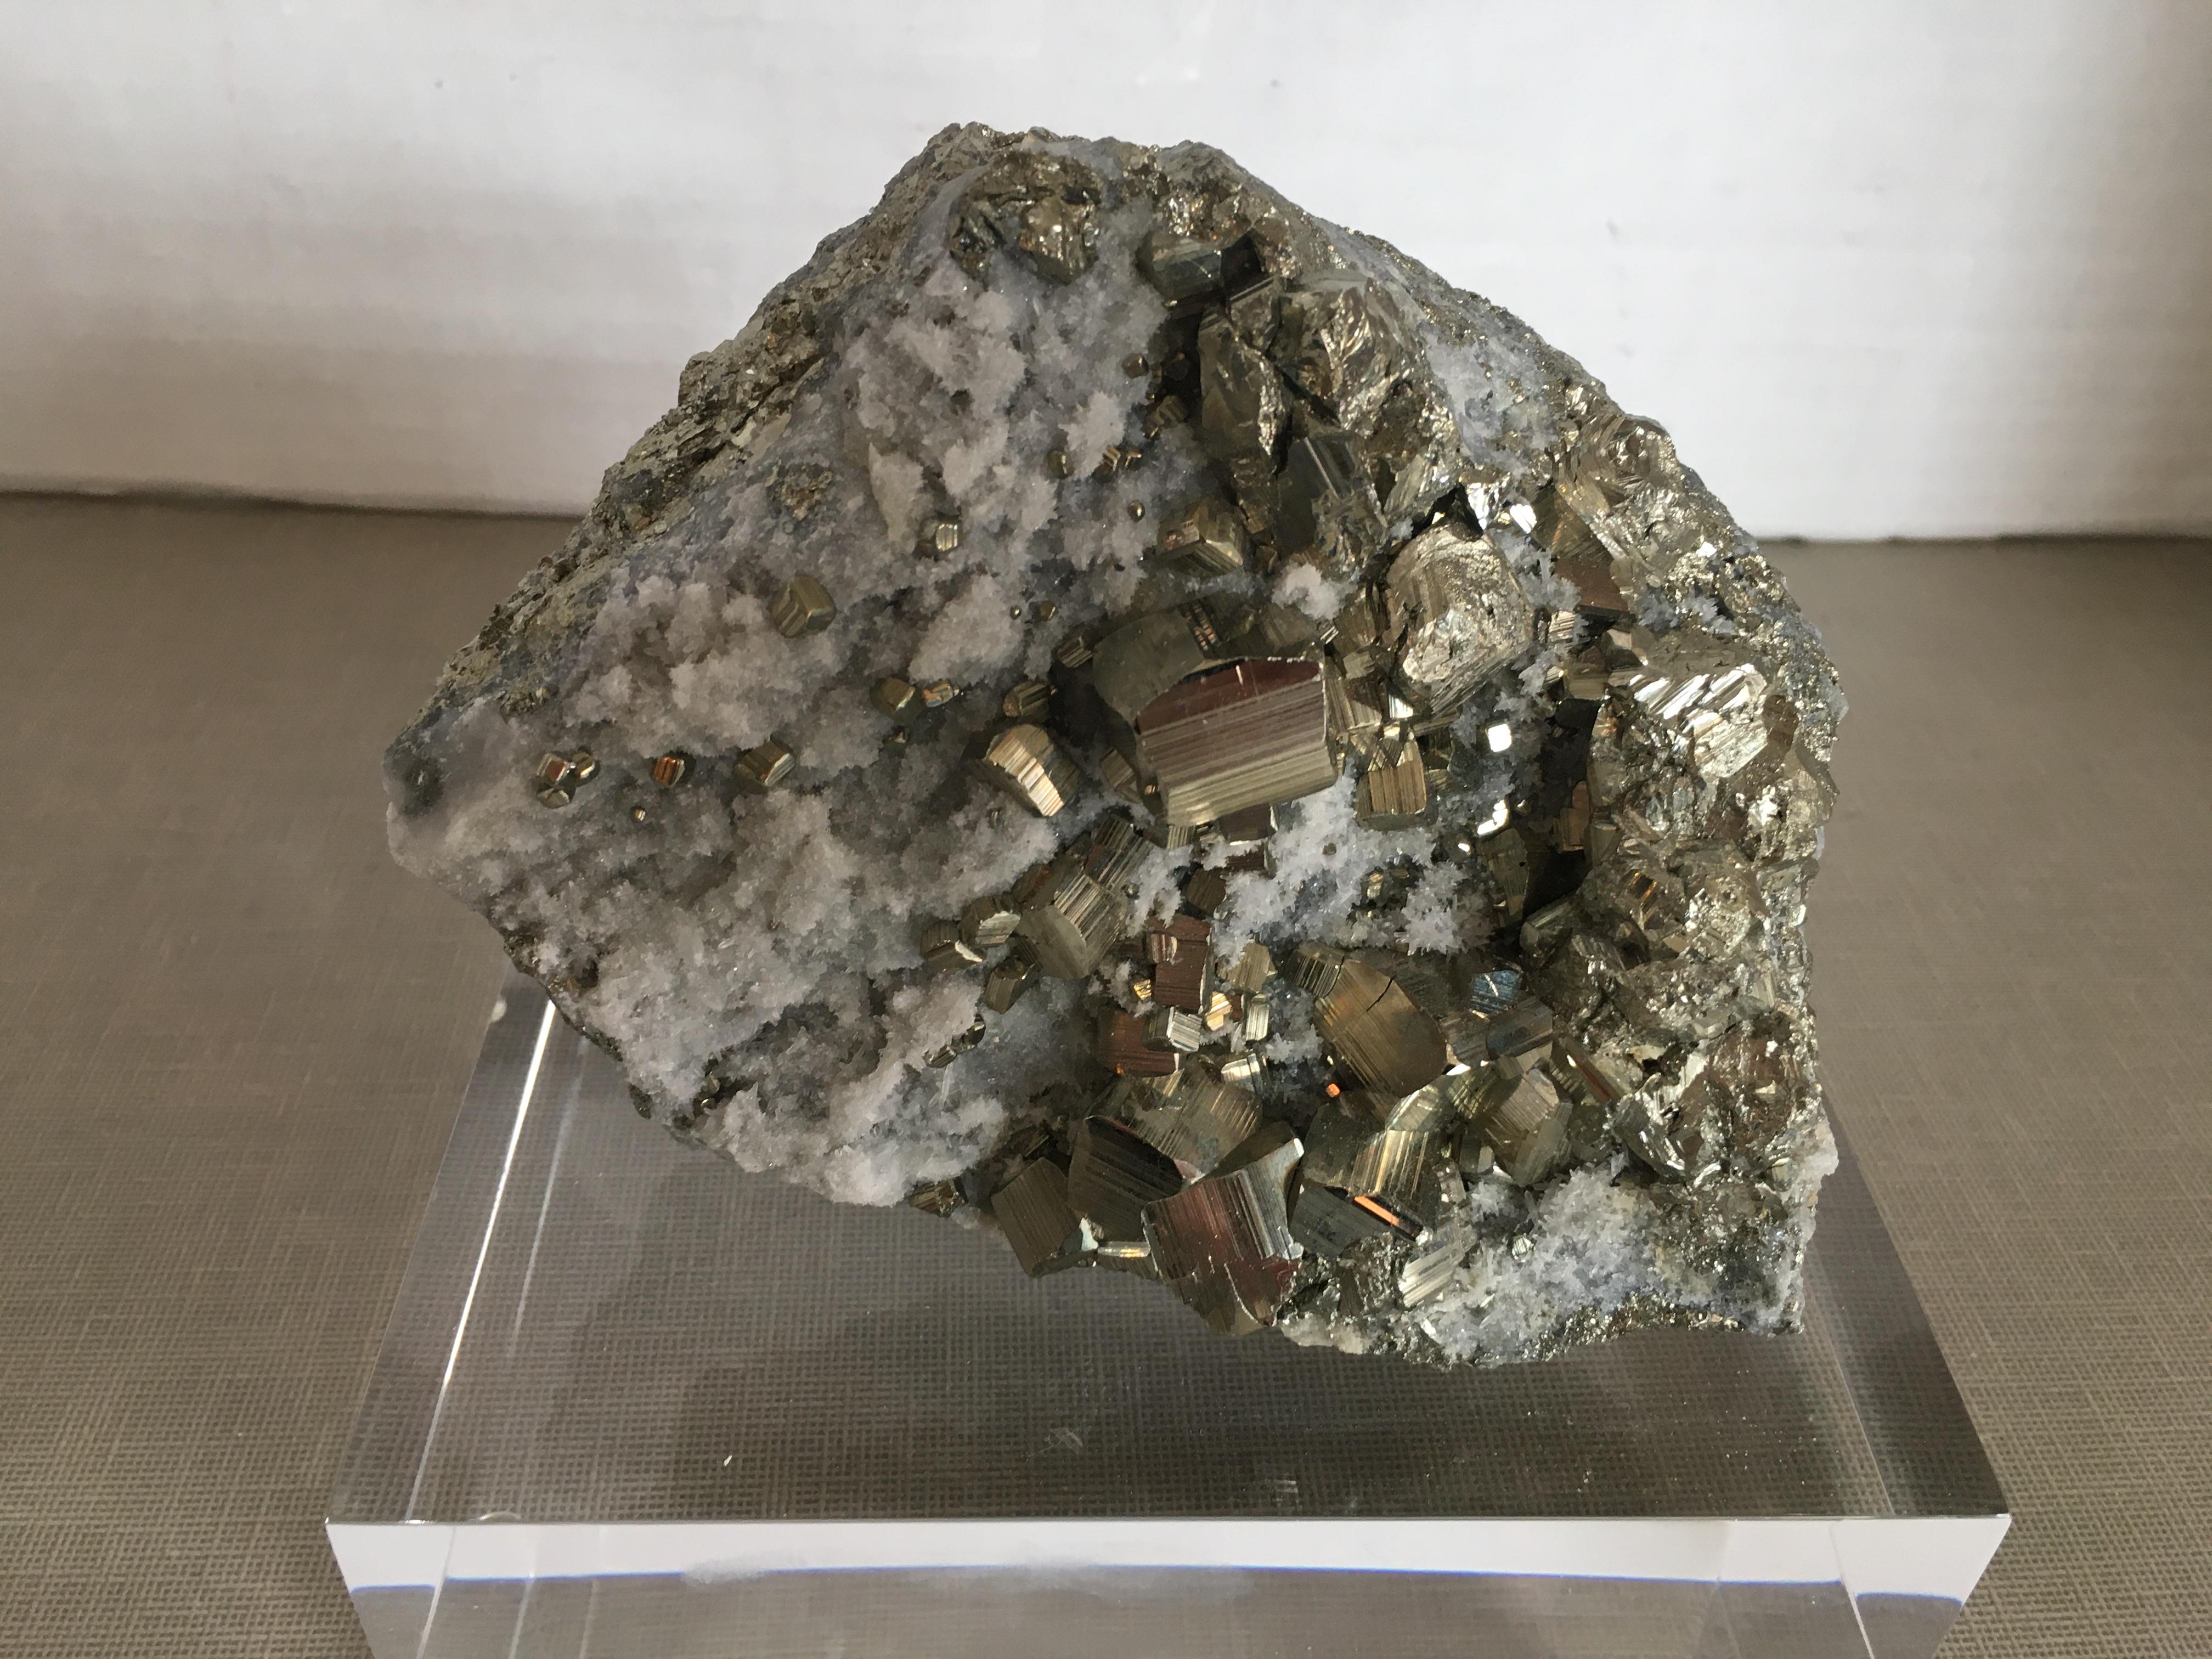 Pyrite with quartz crystals on a Lucite base.